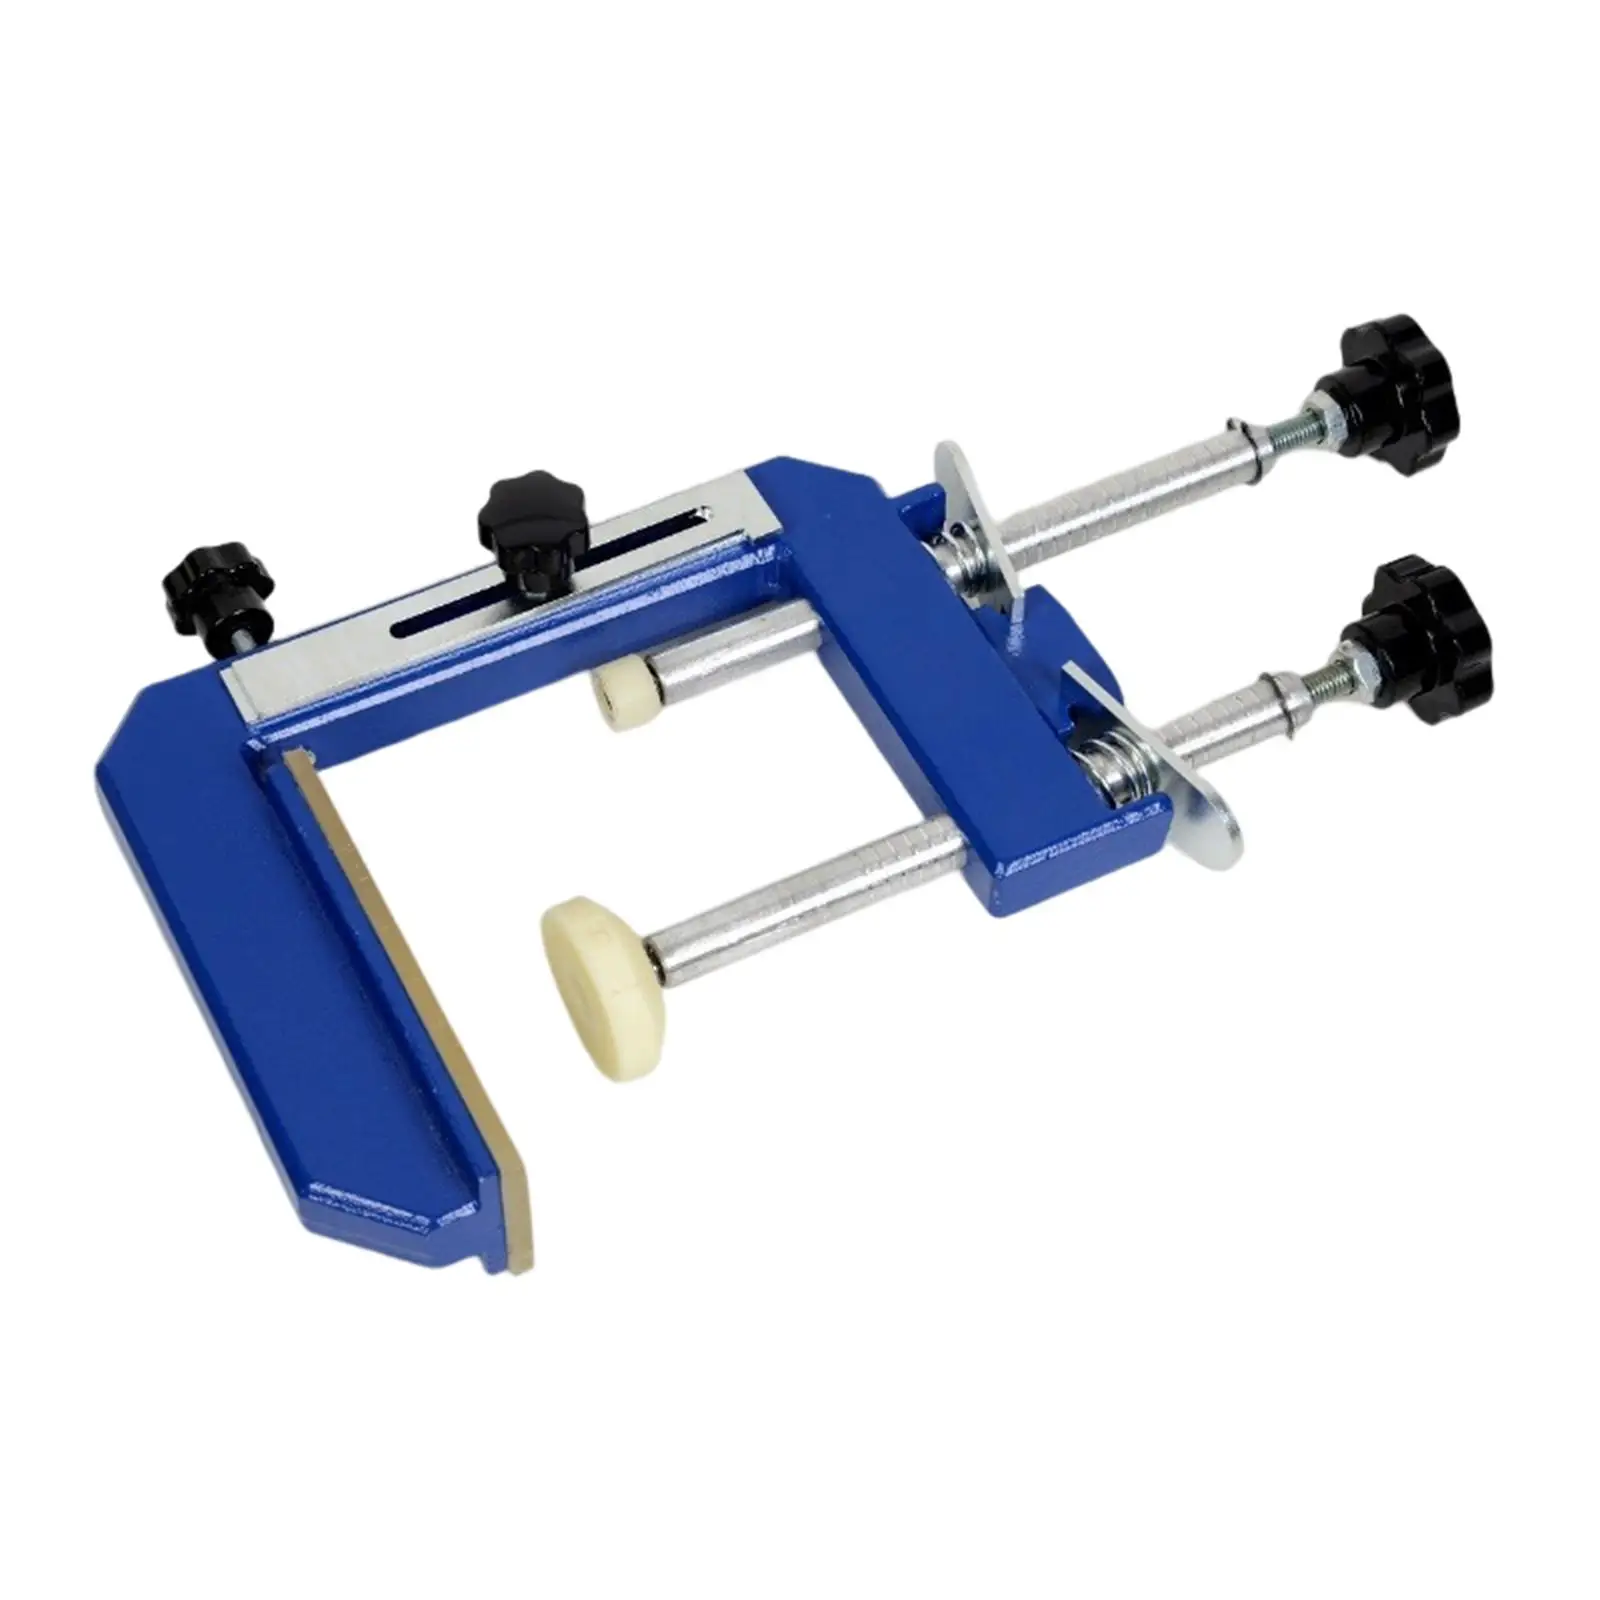 45 Degree Stone Mitre Clamp 33cmx19.5cm Woodworking Tools Slab Install Tool Benchtop Angle Clamps System for Marble Granite Slab